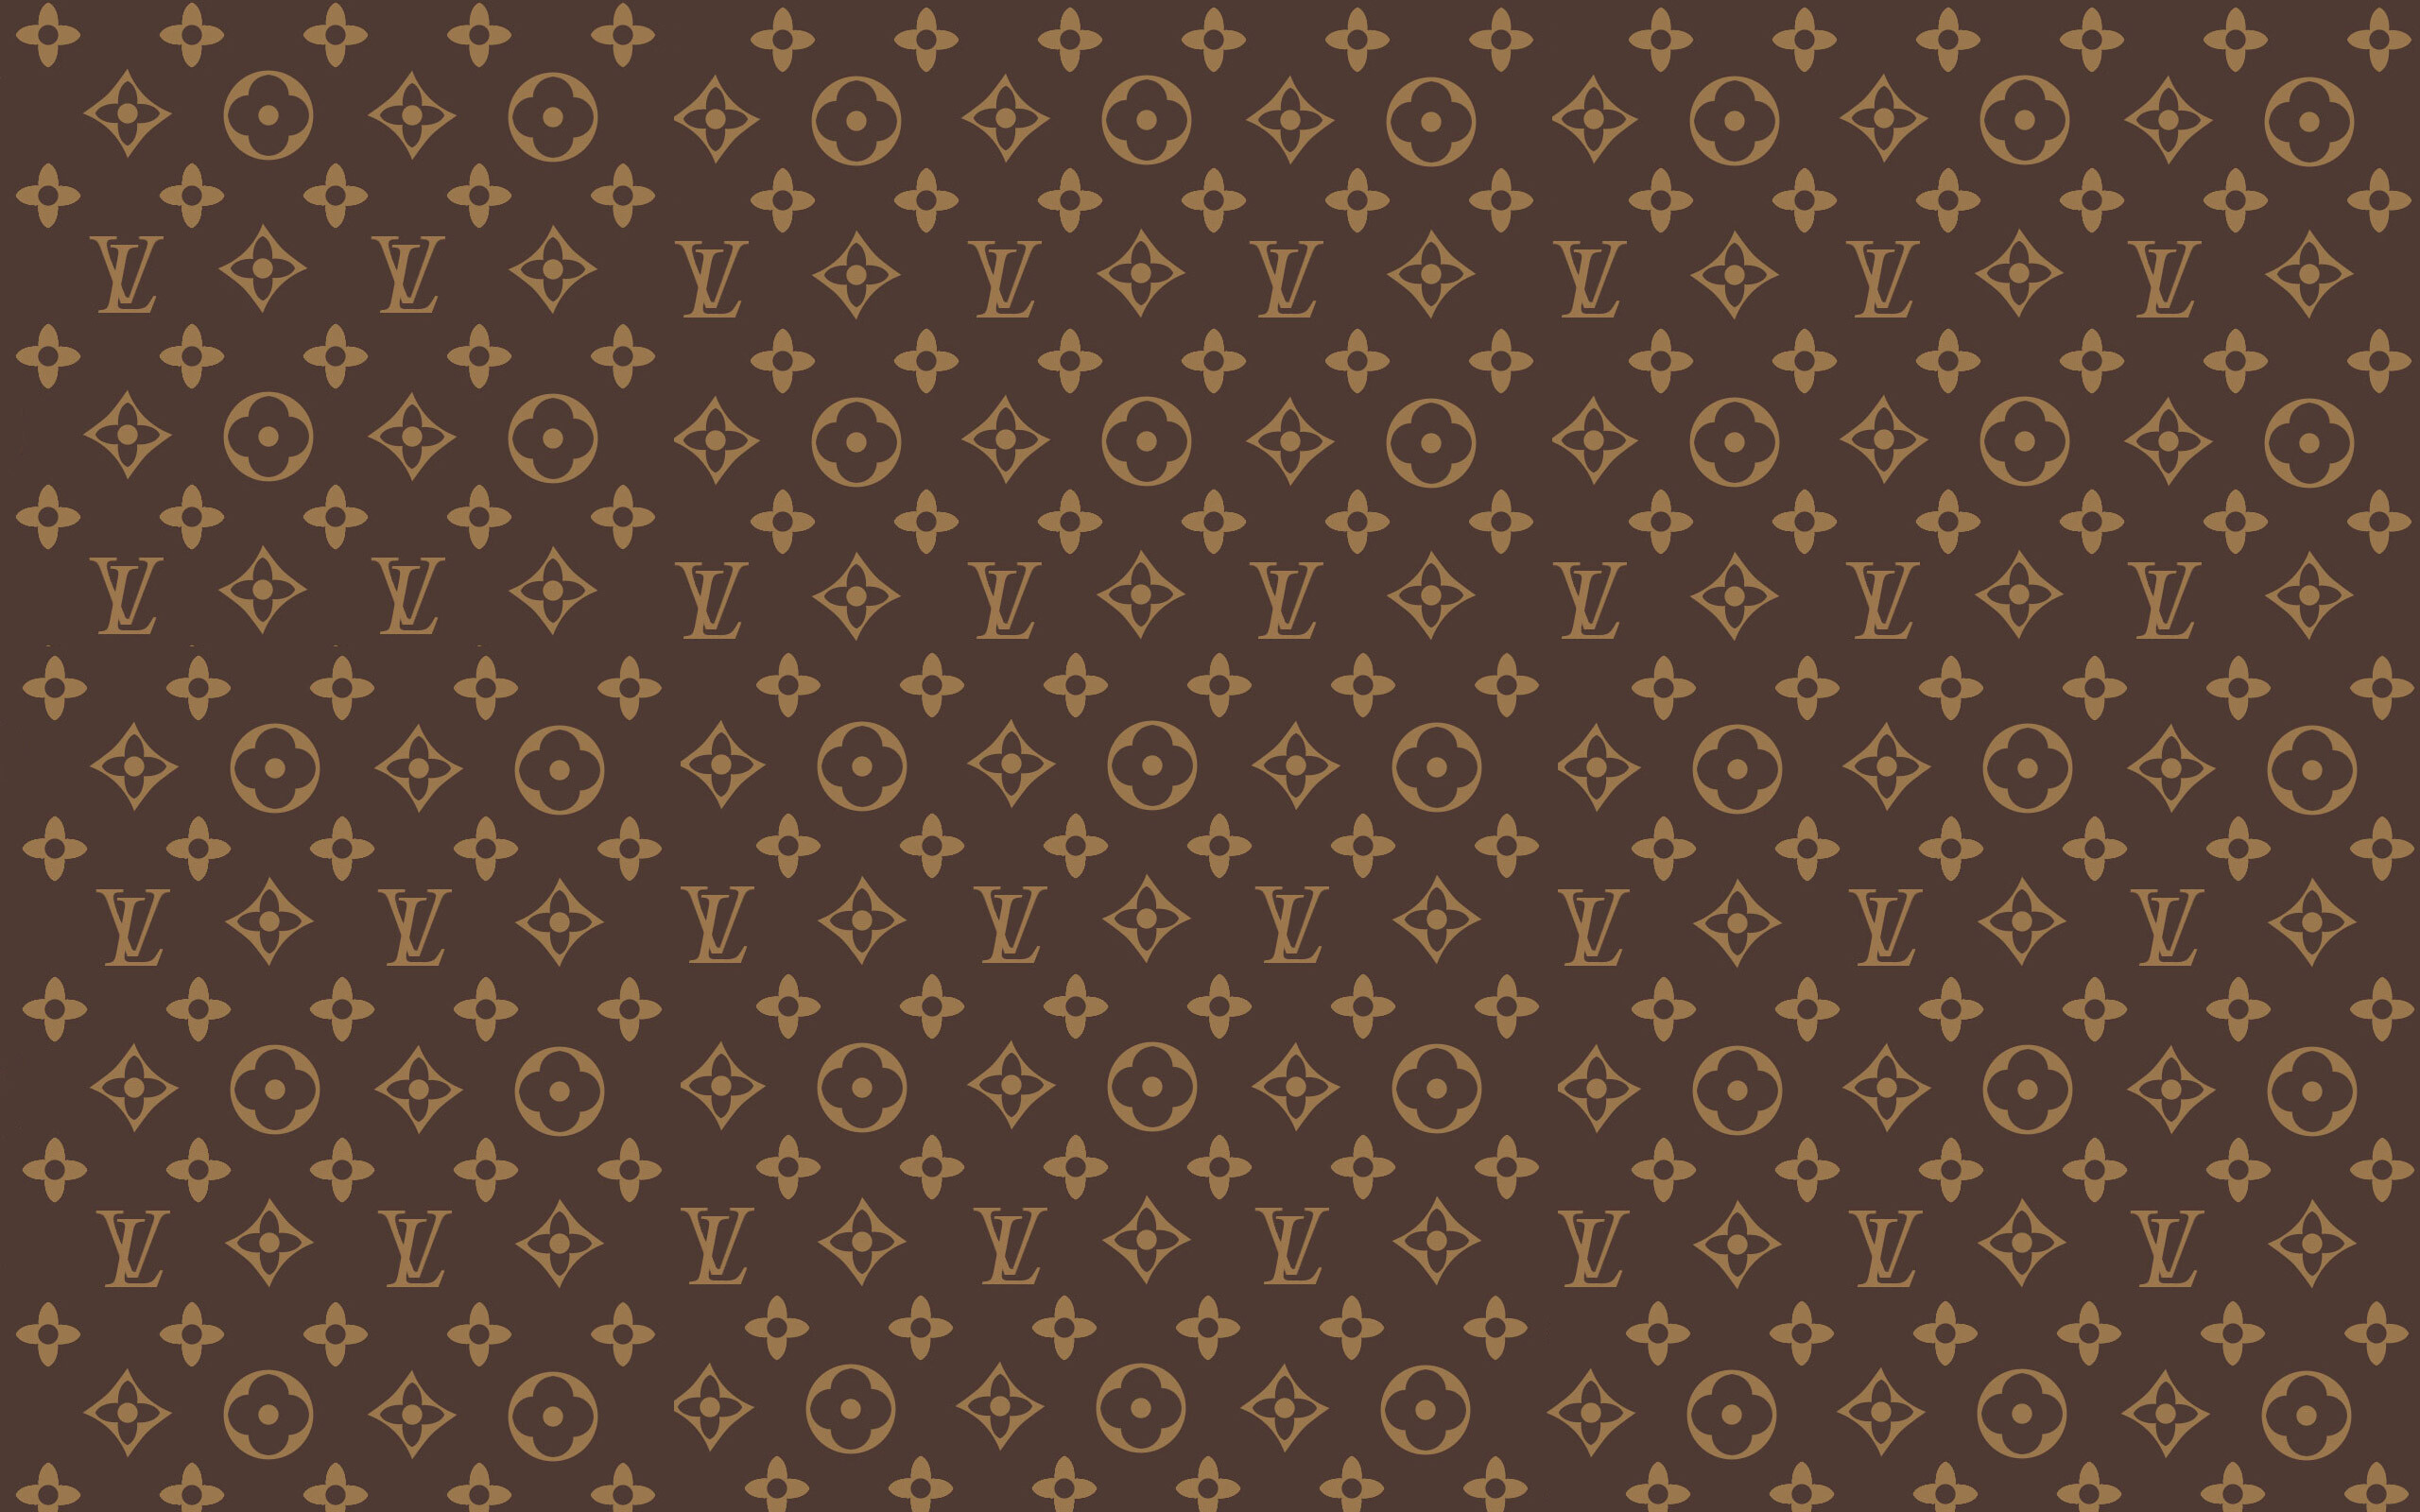 Louis Vuitton: The brand's monogrammed canvas is one of the most recognizable logos in the world. 2560x1600 HD Wallpaper.